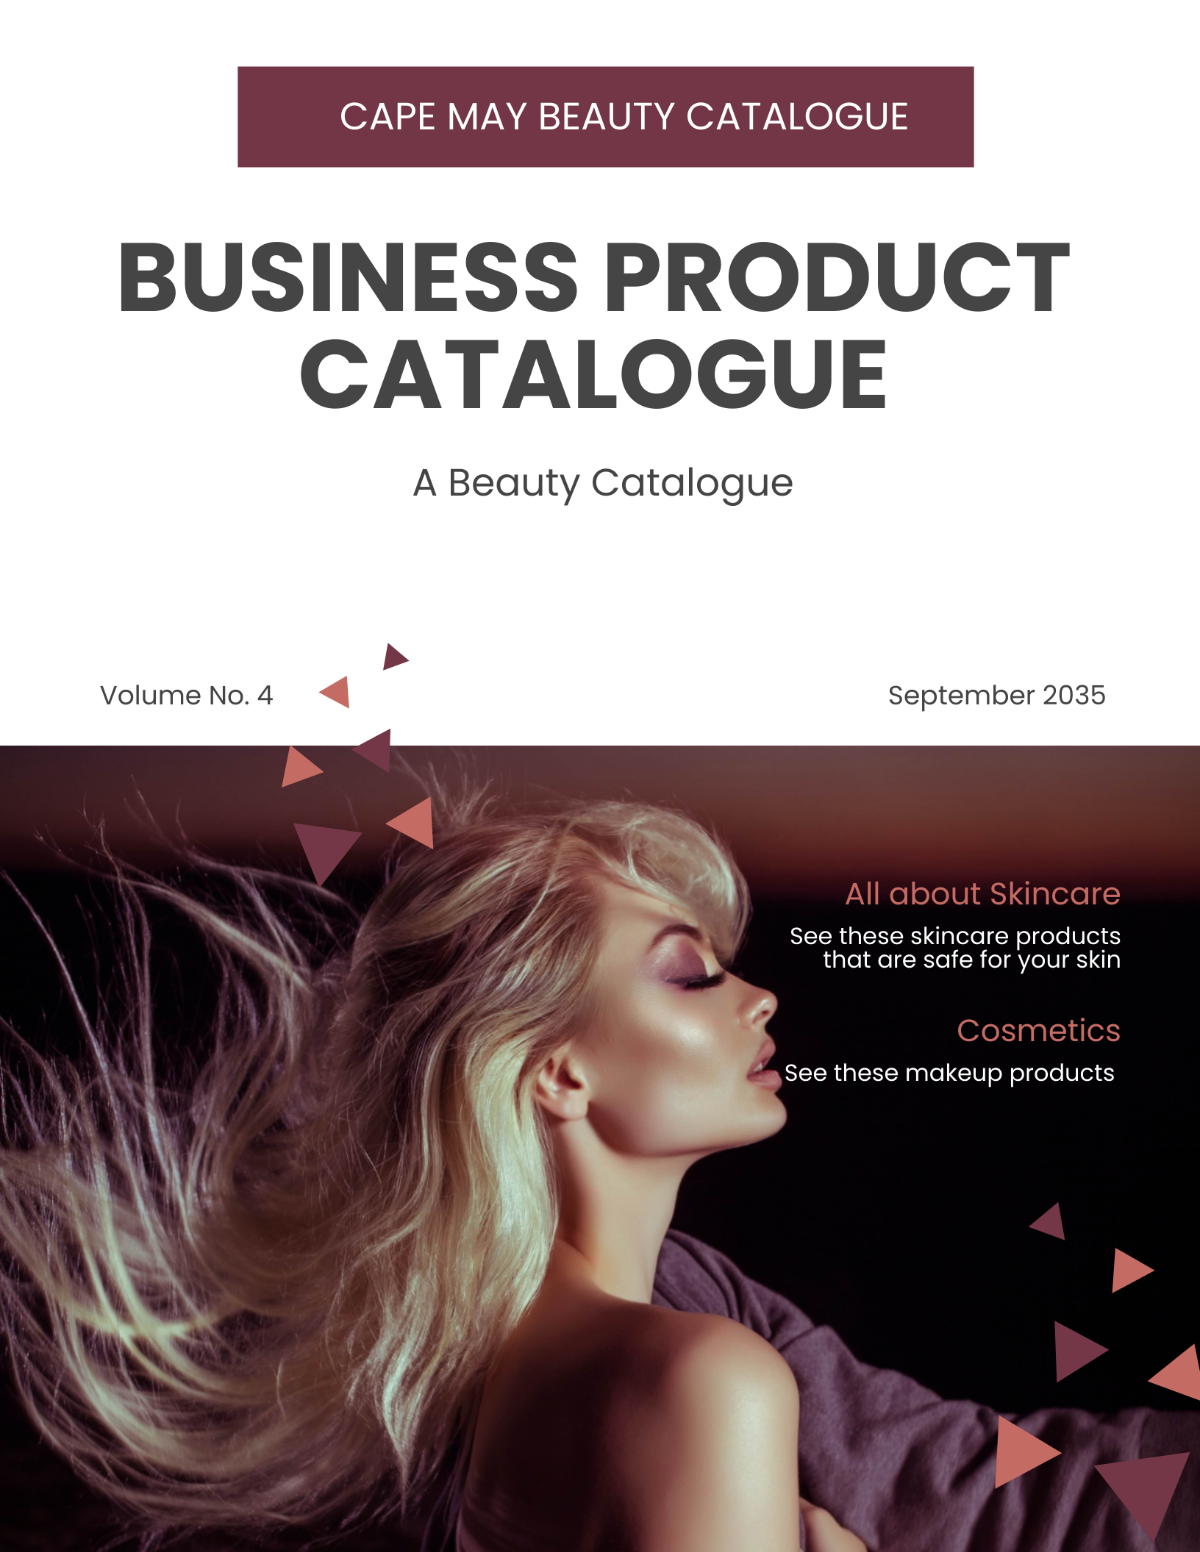 Business Product Catalog